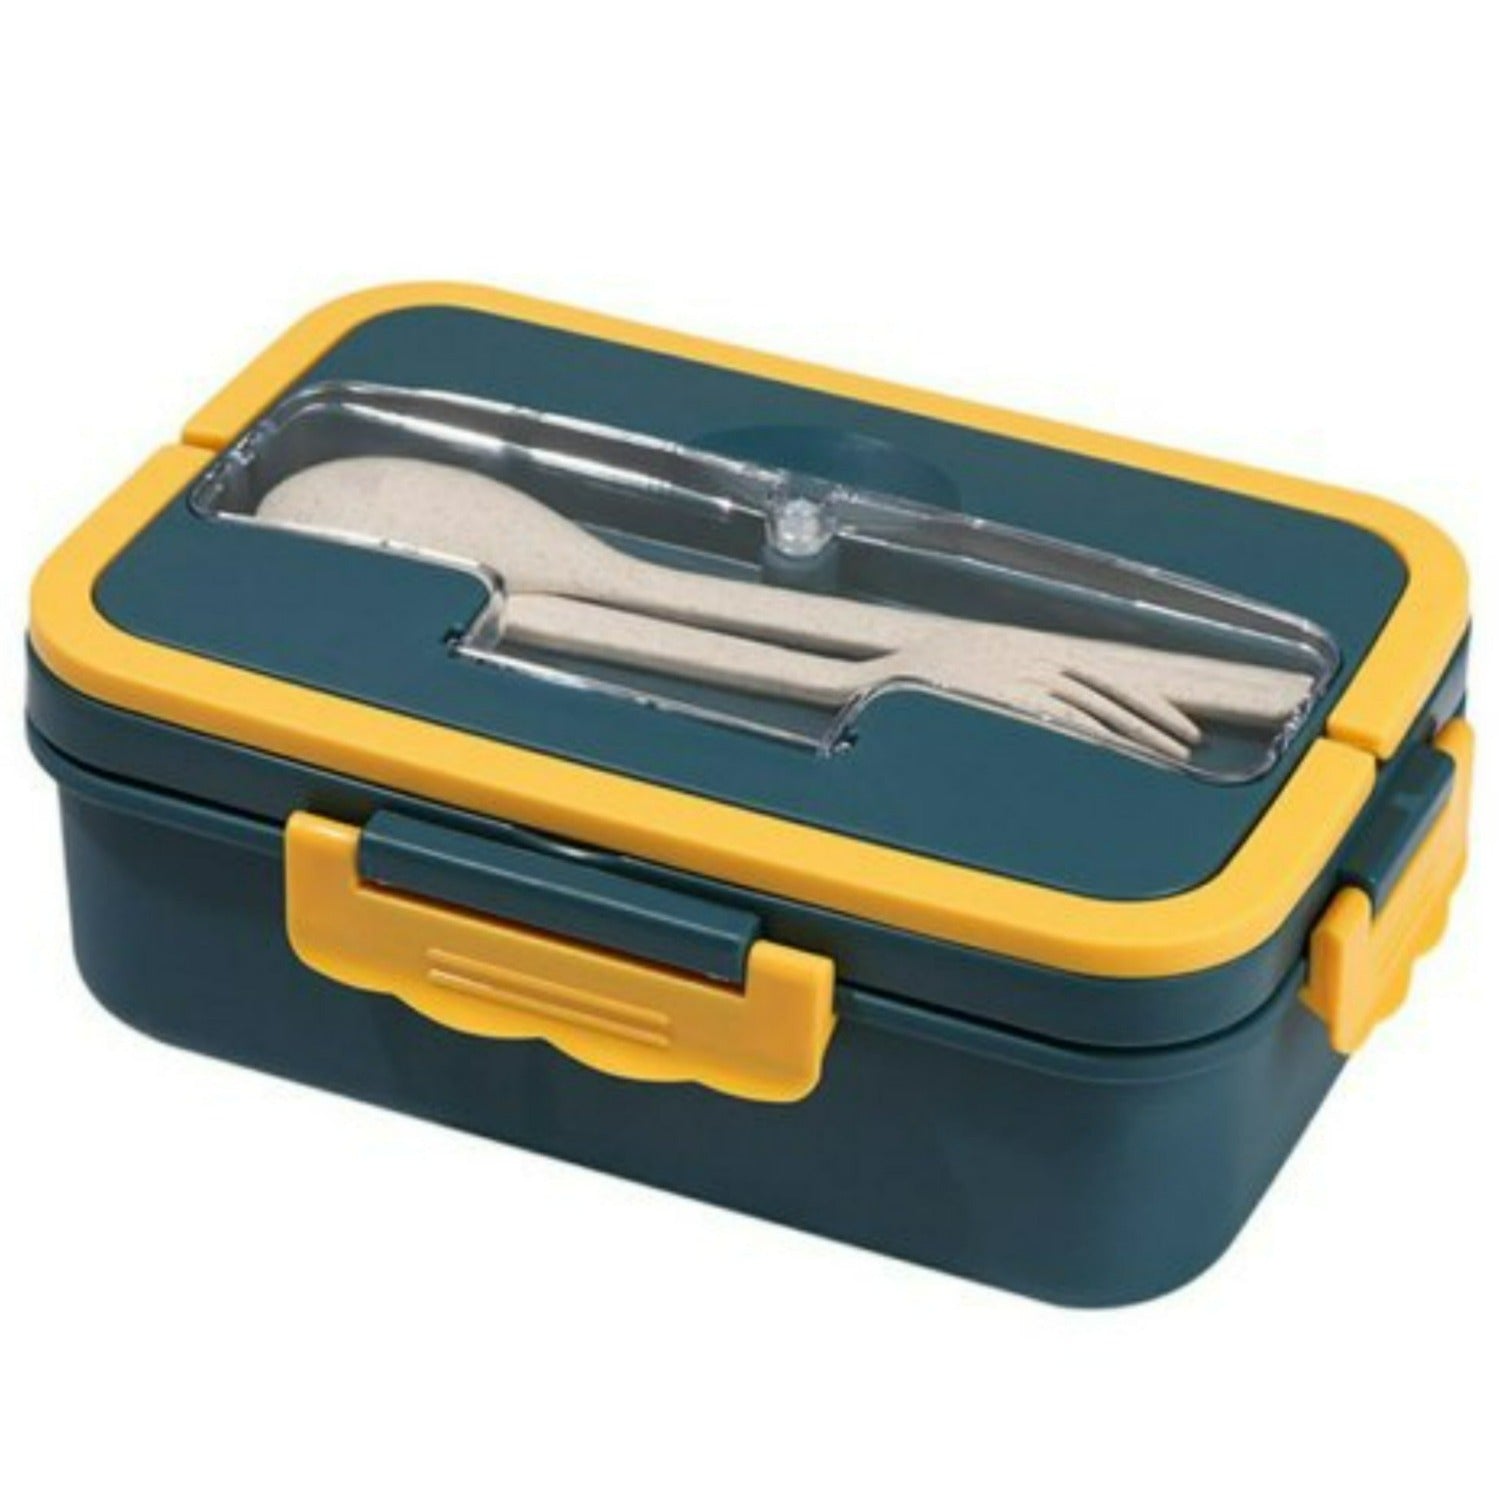 http://allabundantthings.com/cdn/shop/products/Wheat-Straw-With-A-Fork-And-Spoon-Student-Compartment-Lunch-Box-Can-Microwave-Lunch-Fresh-keeping.jpg_640x640_b9c3c612-cb4d-4b28-a73c-e7ac3c505f02.jpg?v=1650108023